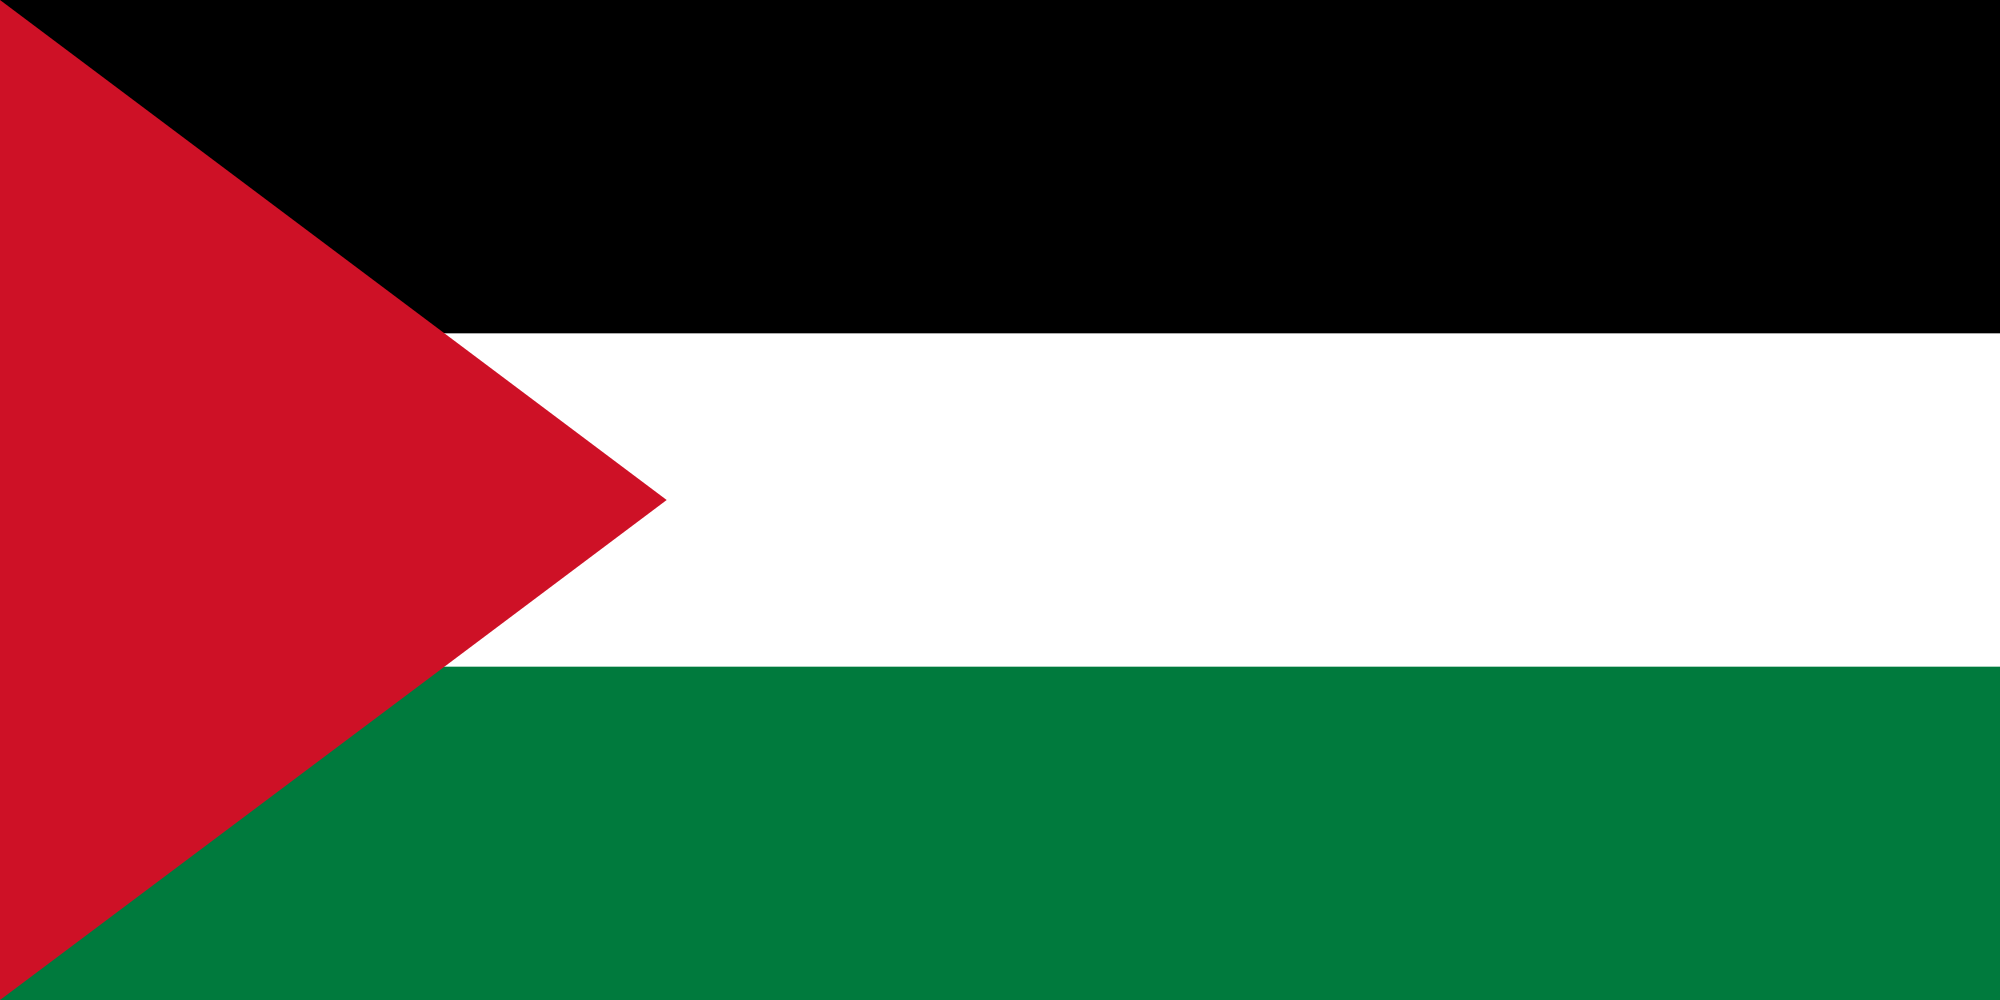 White Stripe with Red Triangle Logo - Flag of Palestine